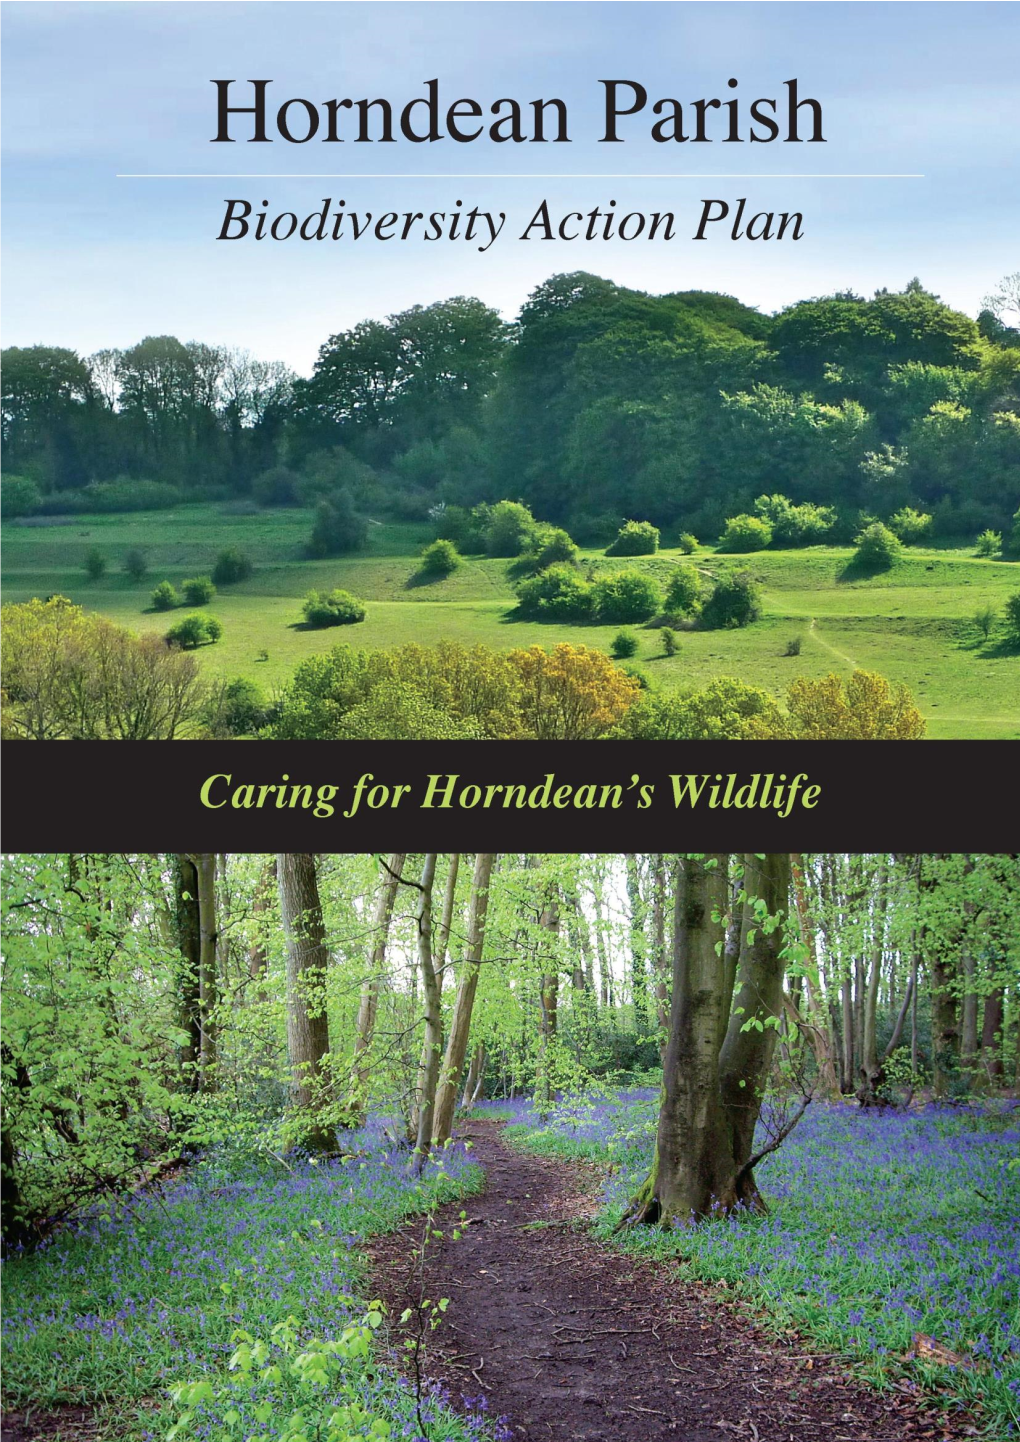 Horndean Biodiversity Action Plan Describes the Rich Natural Environment of the Parish and Is Both Timely and Inspirational